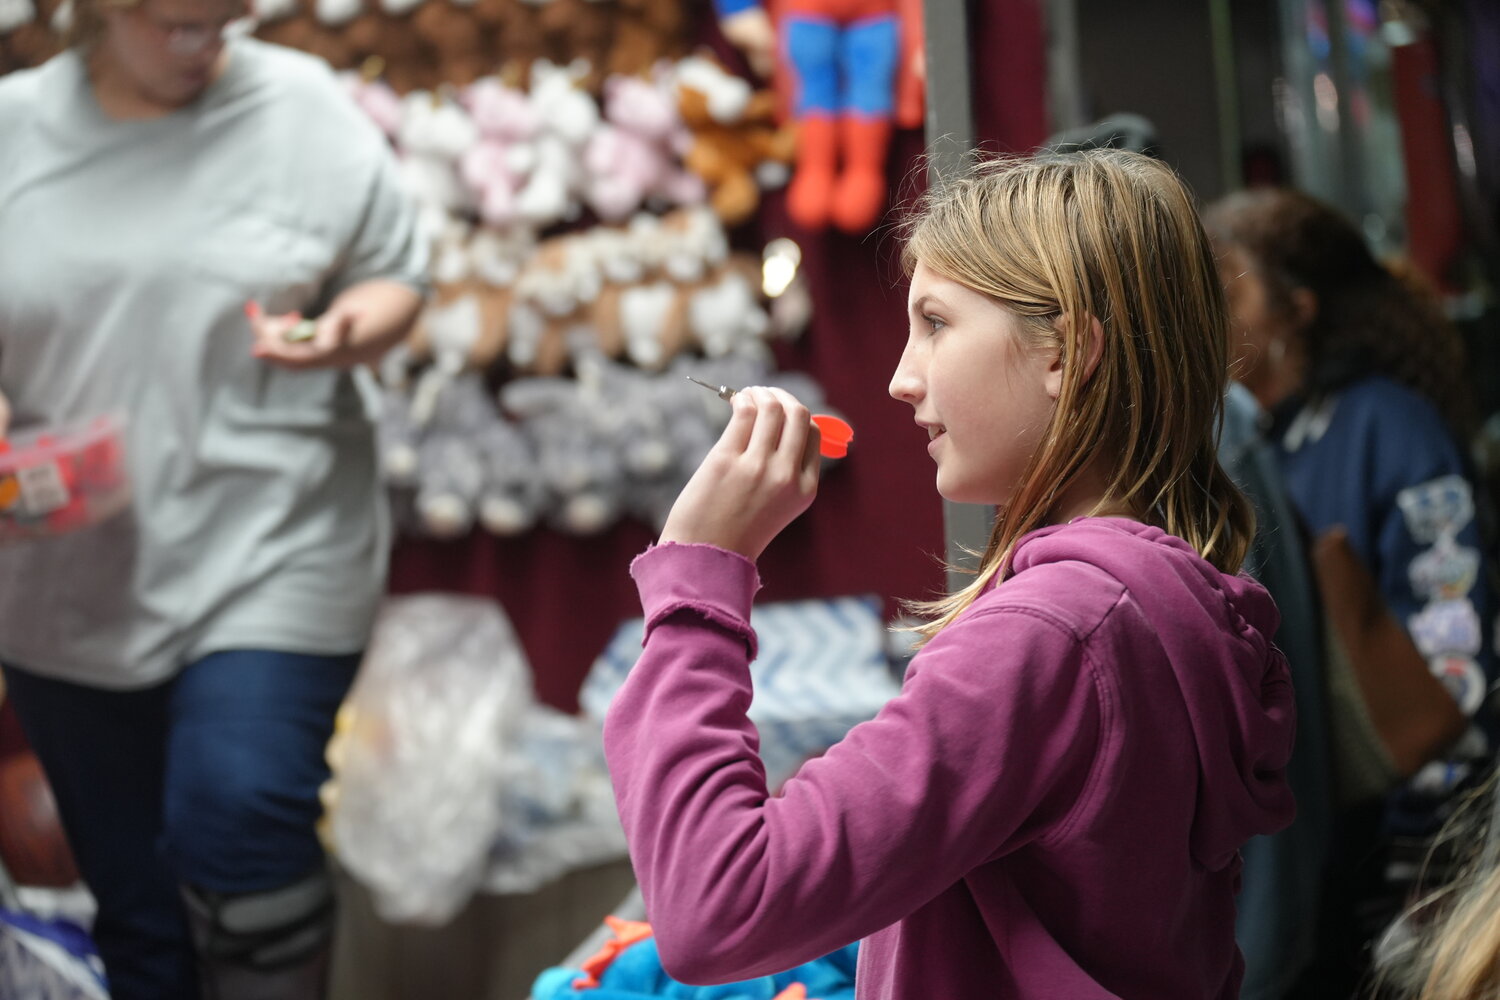 McKenzie Bender, 12, of South Hempstead, played a round of darts at the East Meadow Chamber’s carnival.